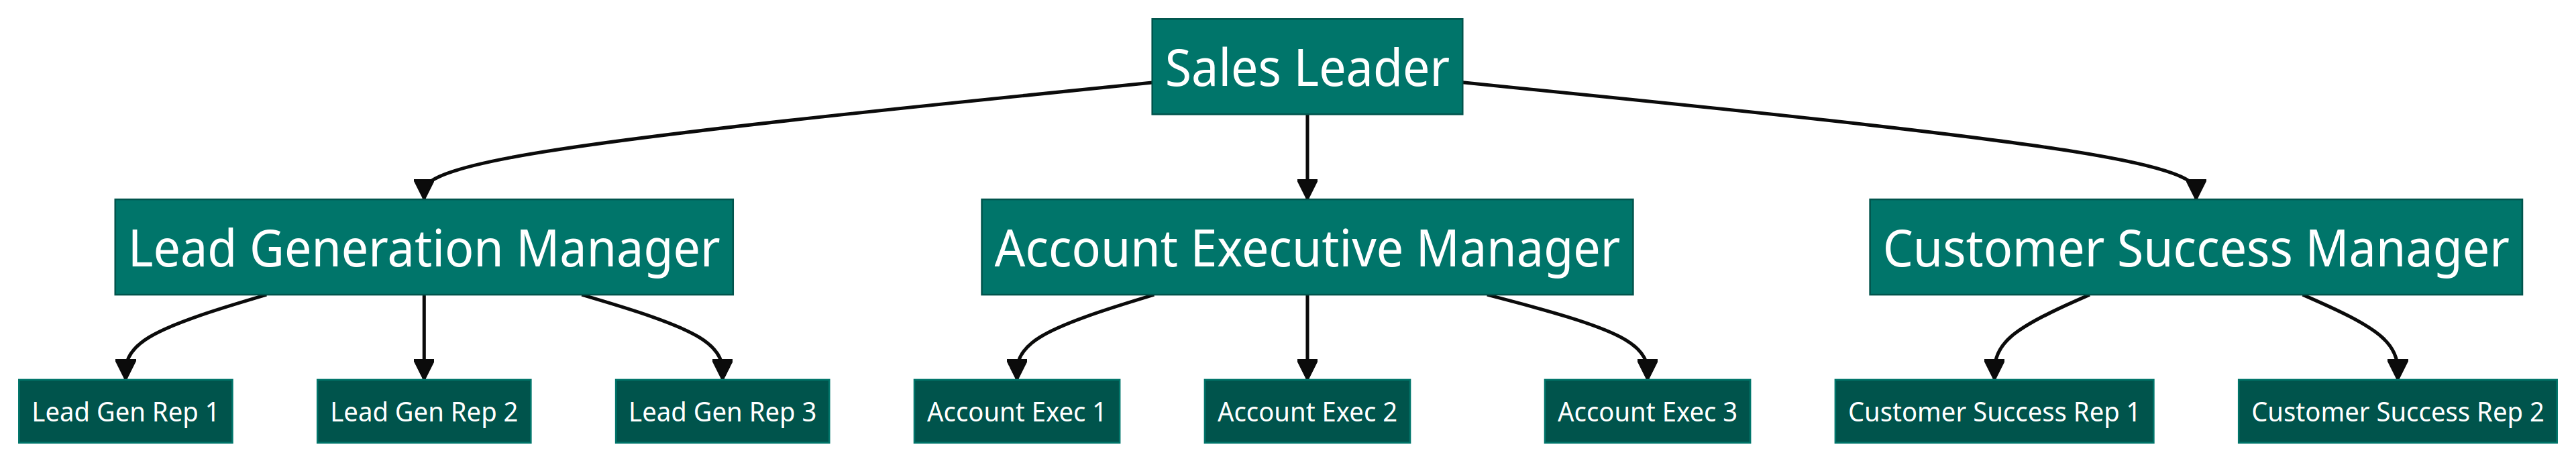 functional sales team structure